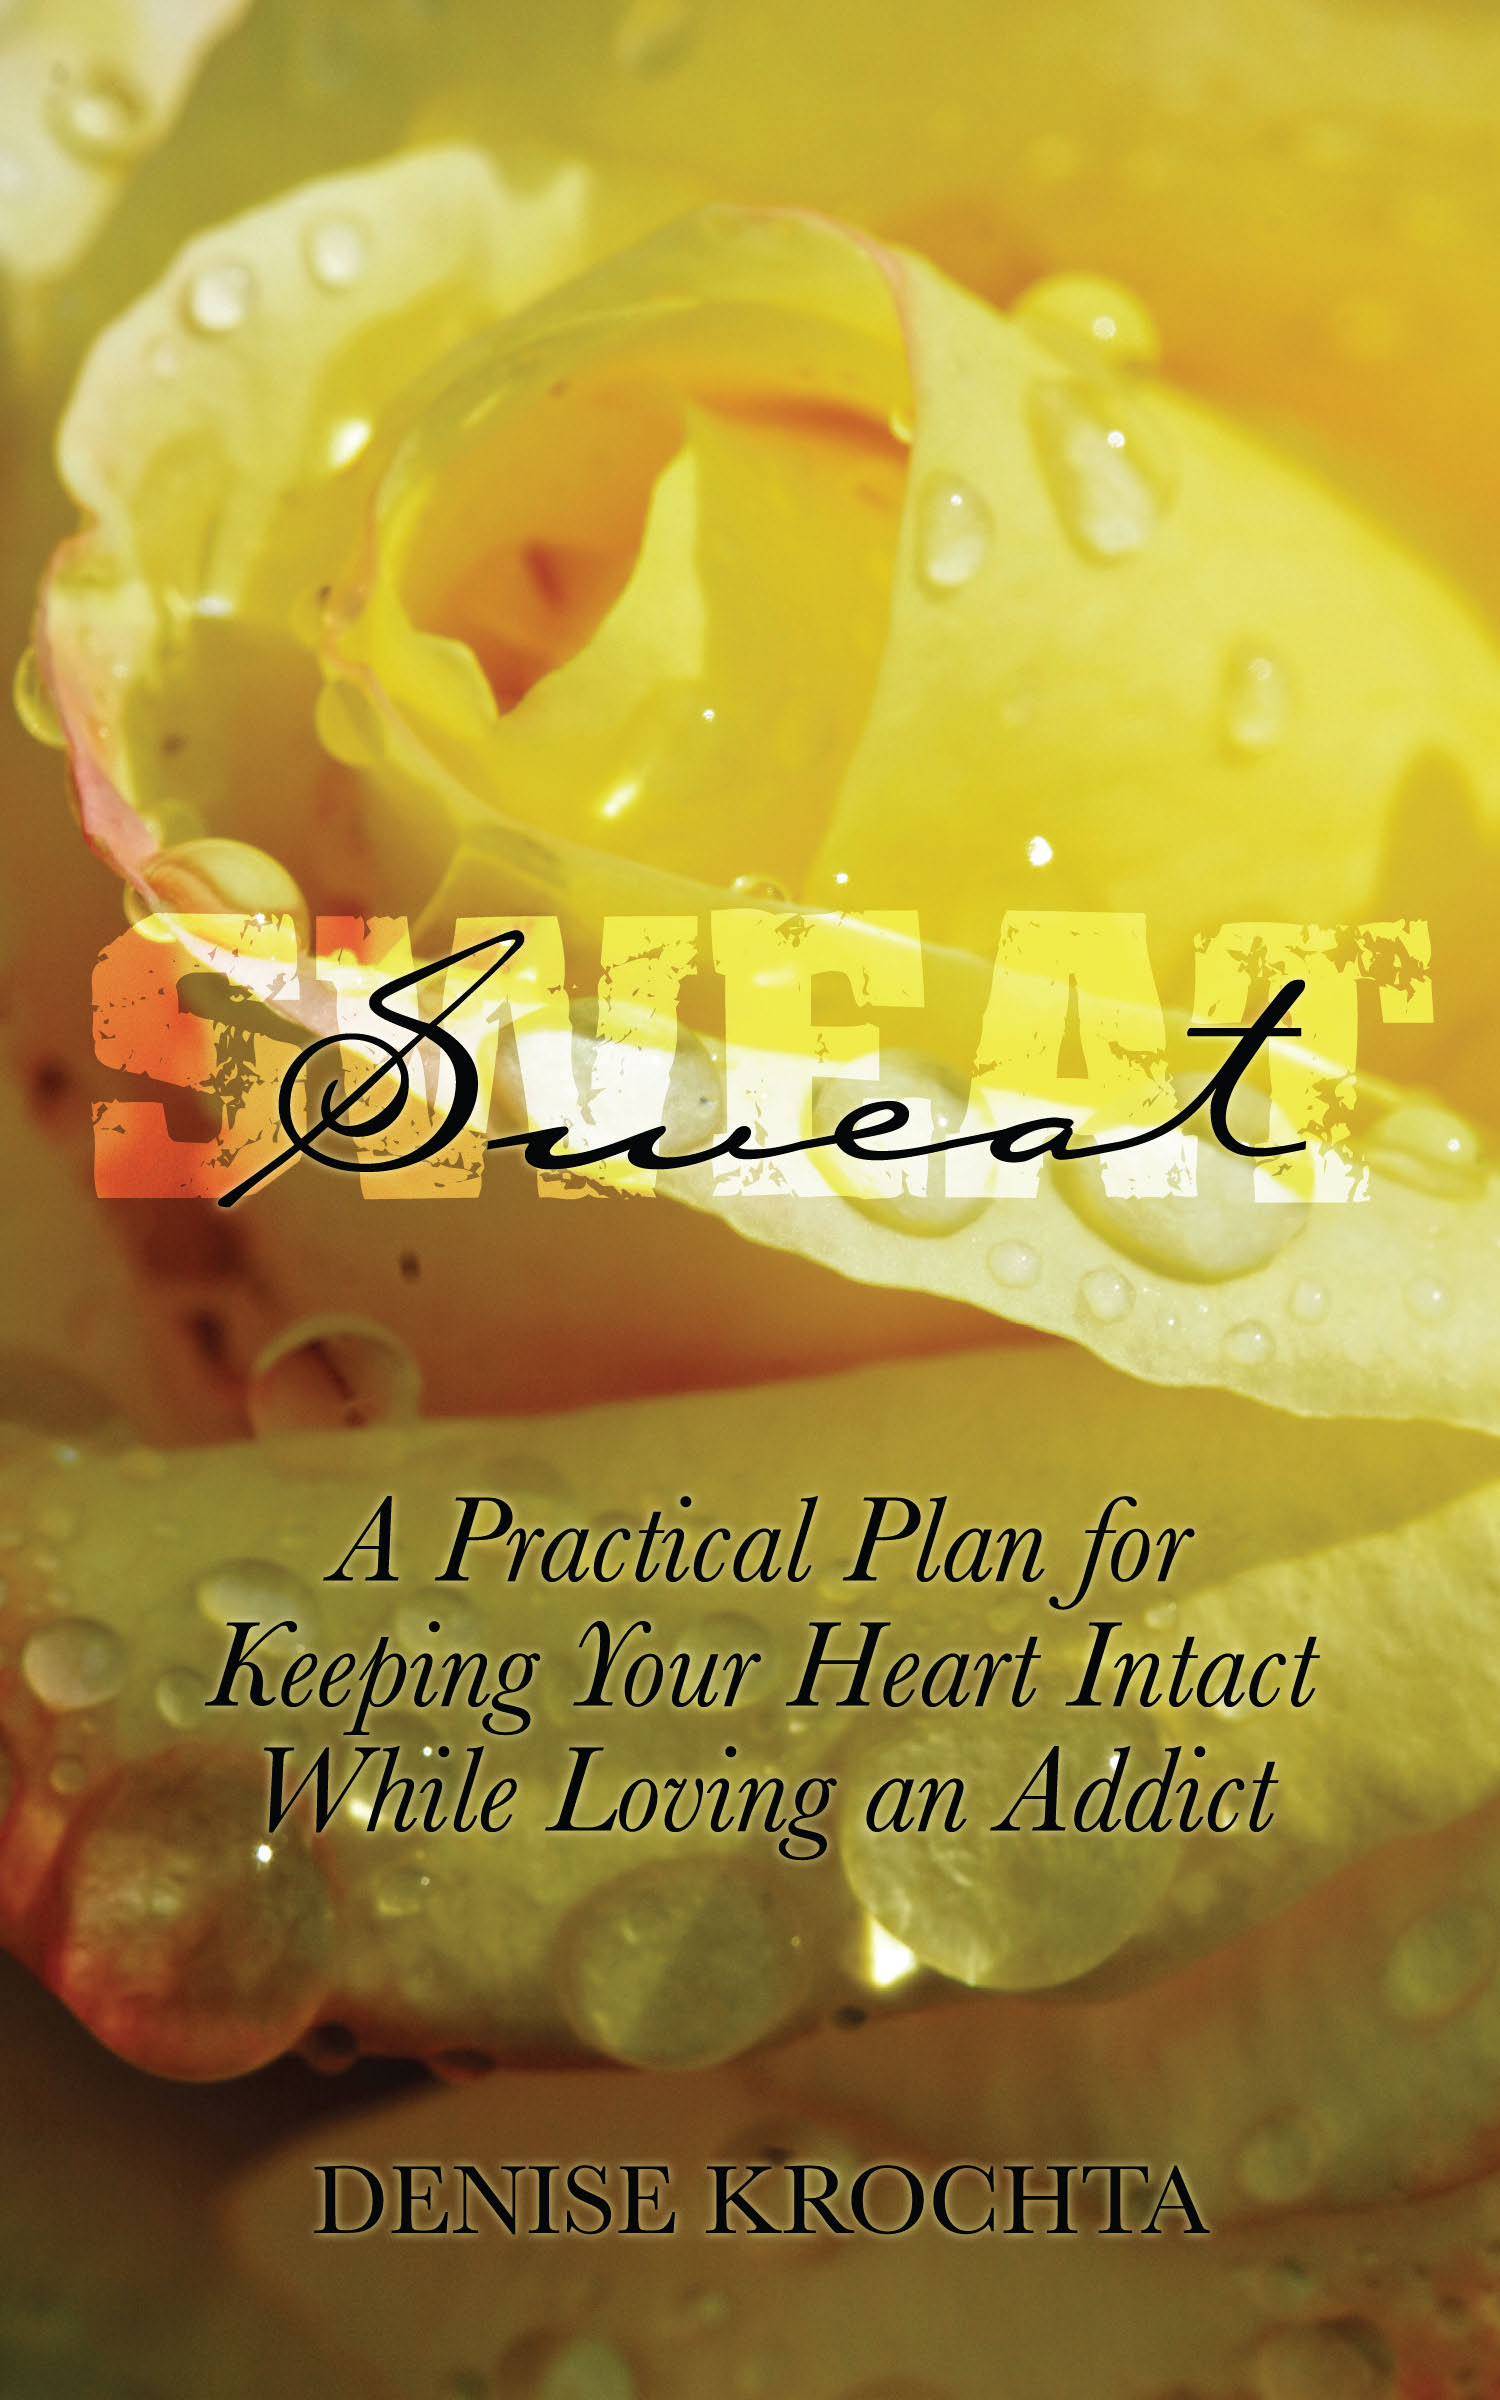 Sweat: A Practical Plan For Keeping Your Heart Intact While Loving an Addict